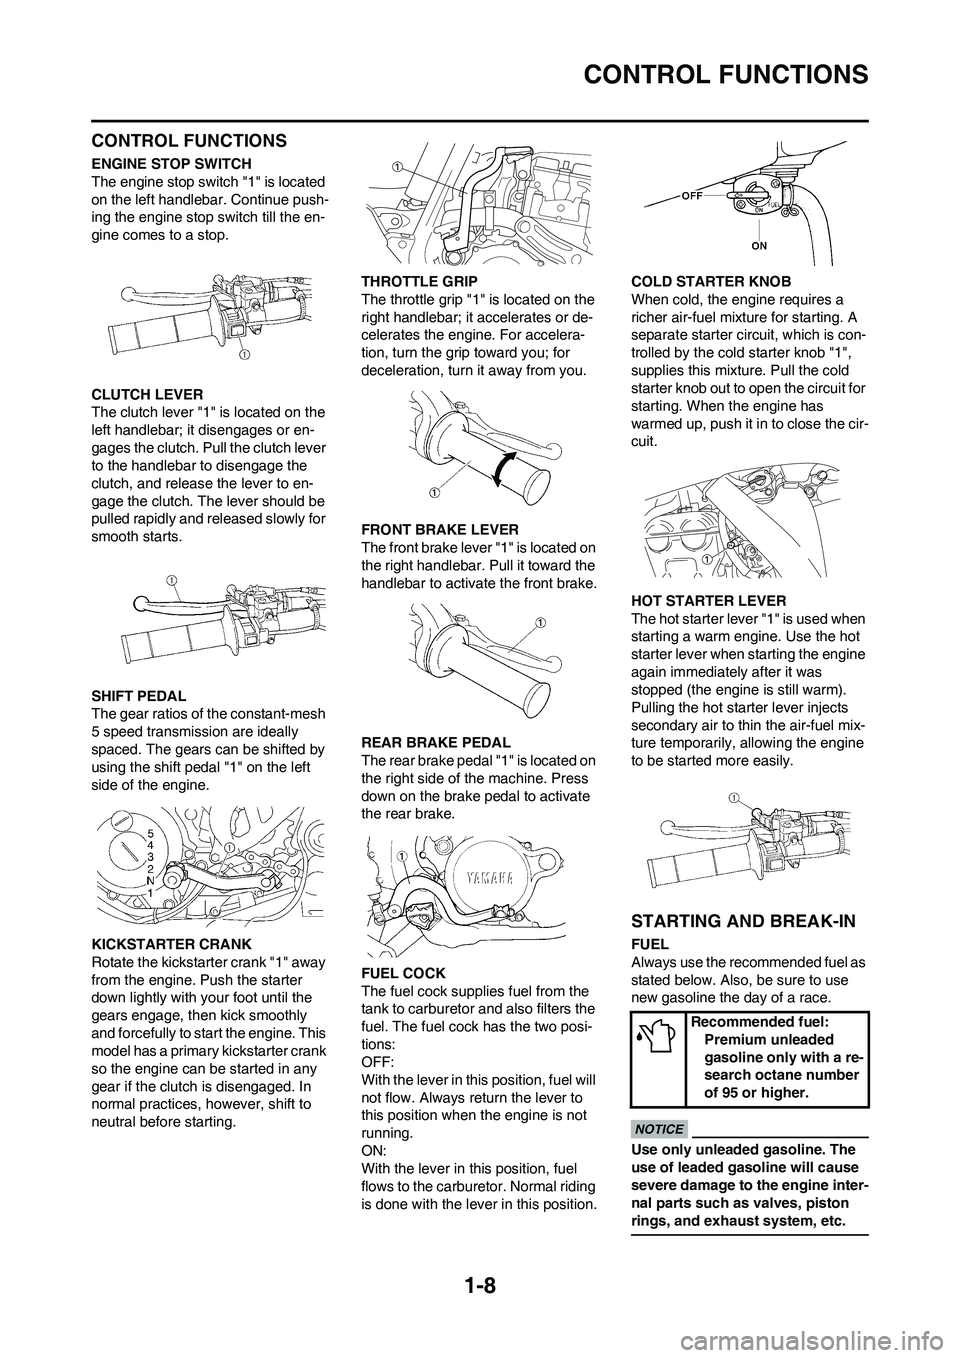 YAMAHA YZ450F 2009  Owners Manual 1-8
CONTROL FUNCTIONS
CONTROL FUNCTIONS
ENGINE STOP SWITCH
The engine stop switch "1" is located 
on the left handlebar. Continue push-
ing the engine stop switch till the en-
gine comes to a stop.
CL